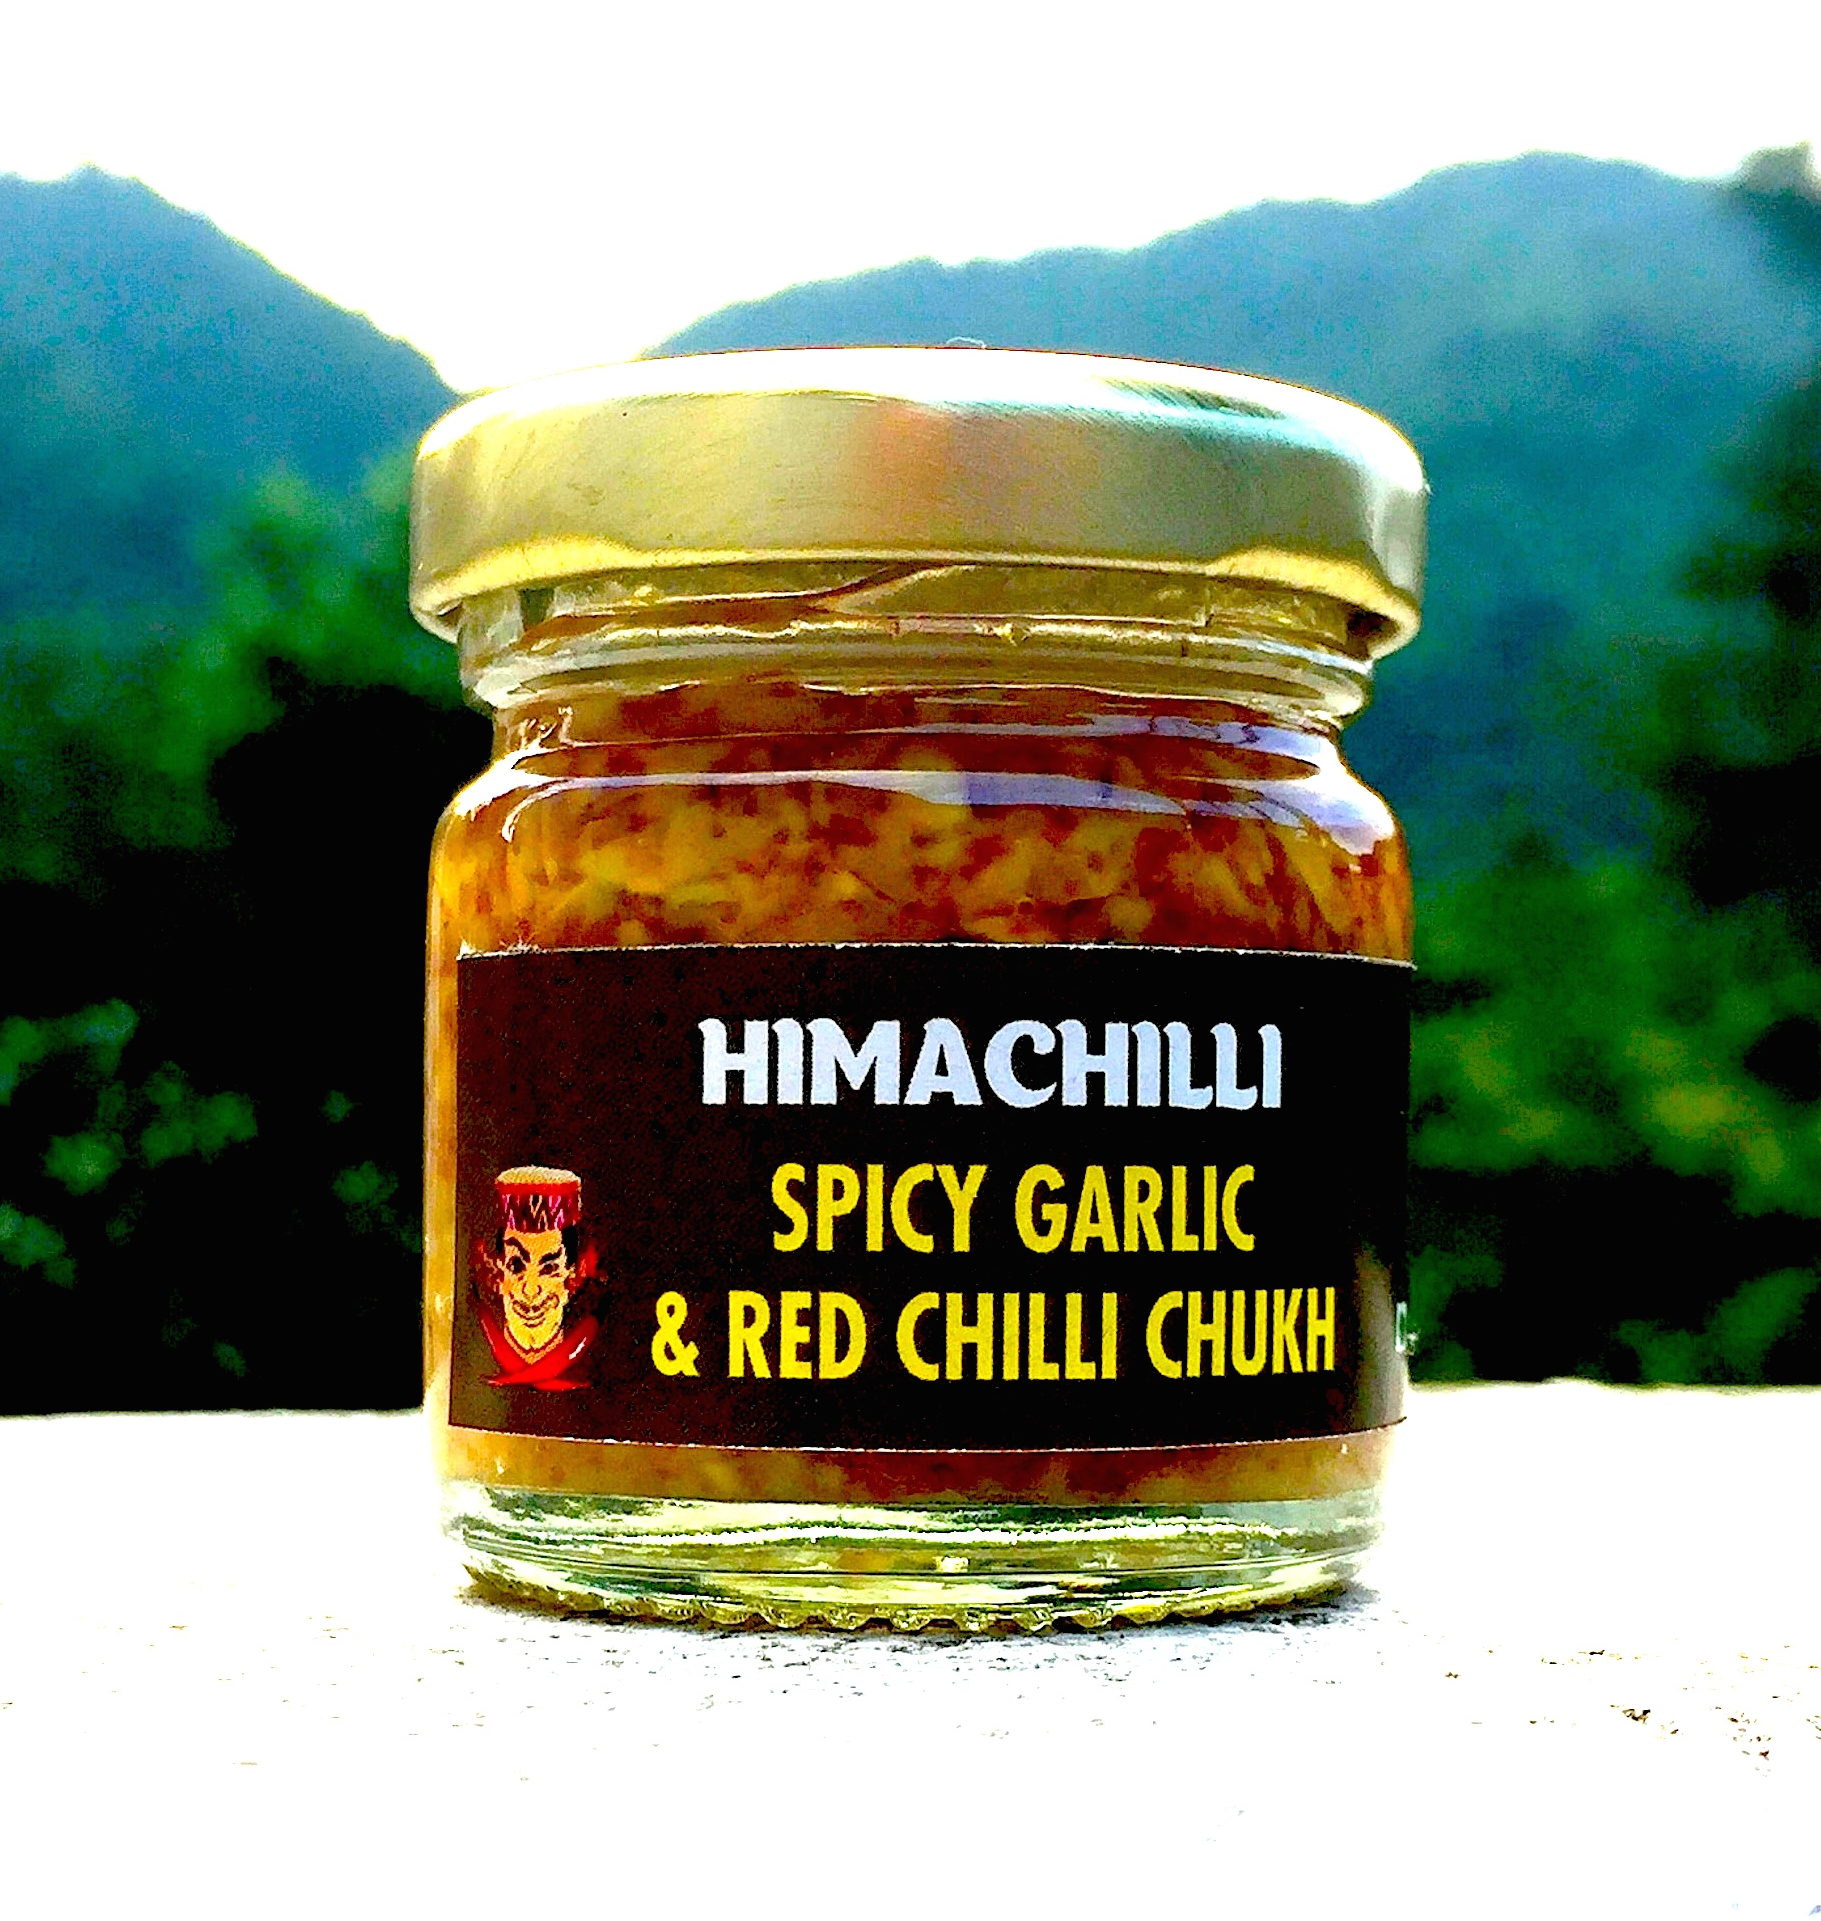 Small-Himachilli Chukh Spicy Garlic Chilli Dip & Cooking Sauce (Coming Soon)